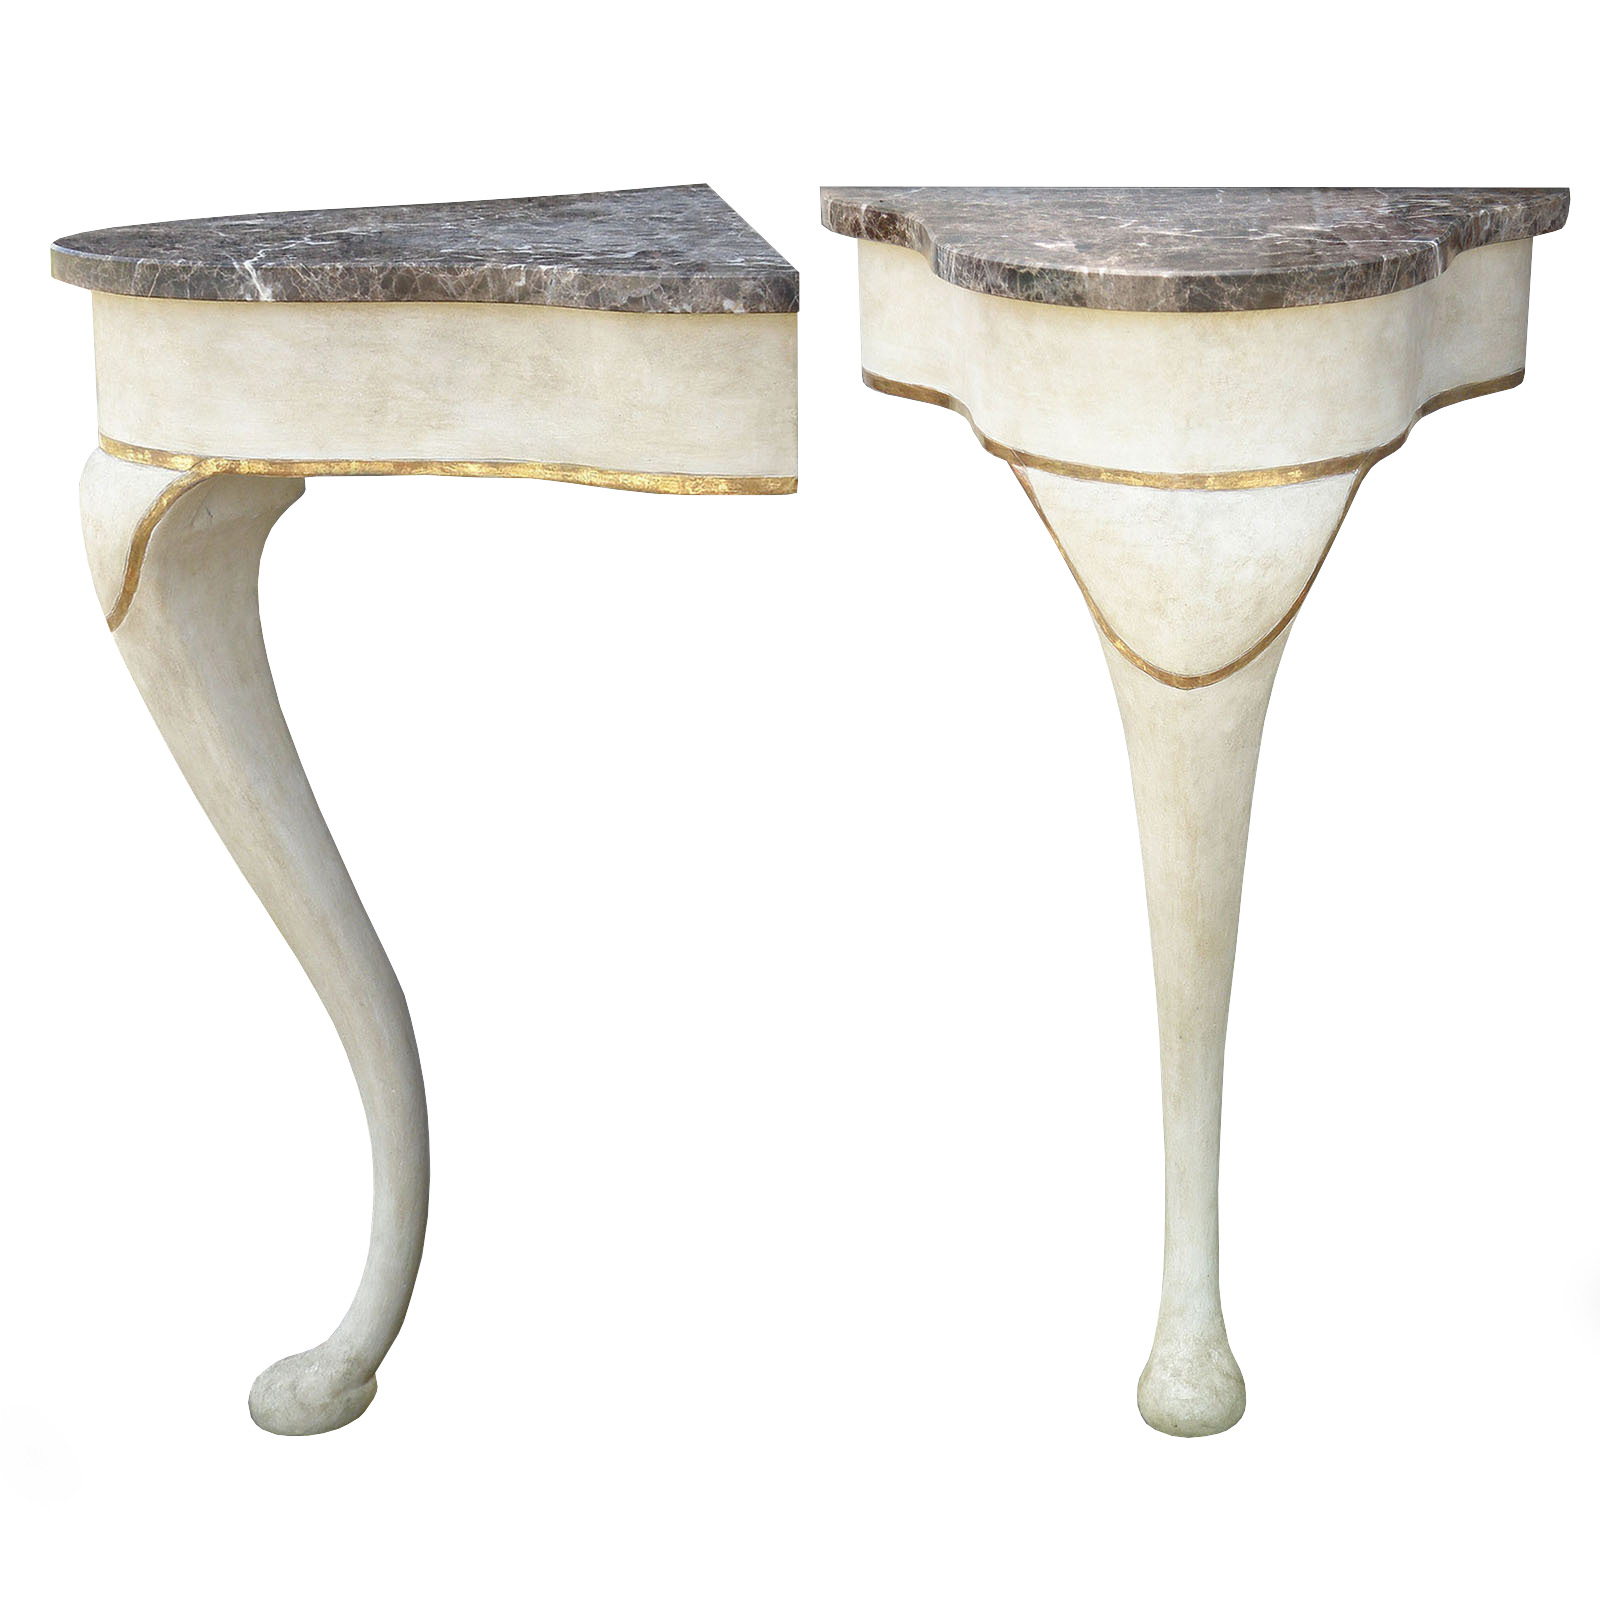 Pair of Cottesmore painted bedside console tables. Made to order by Perceval Designs